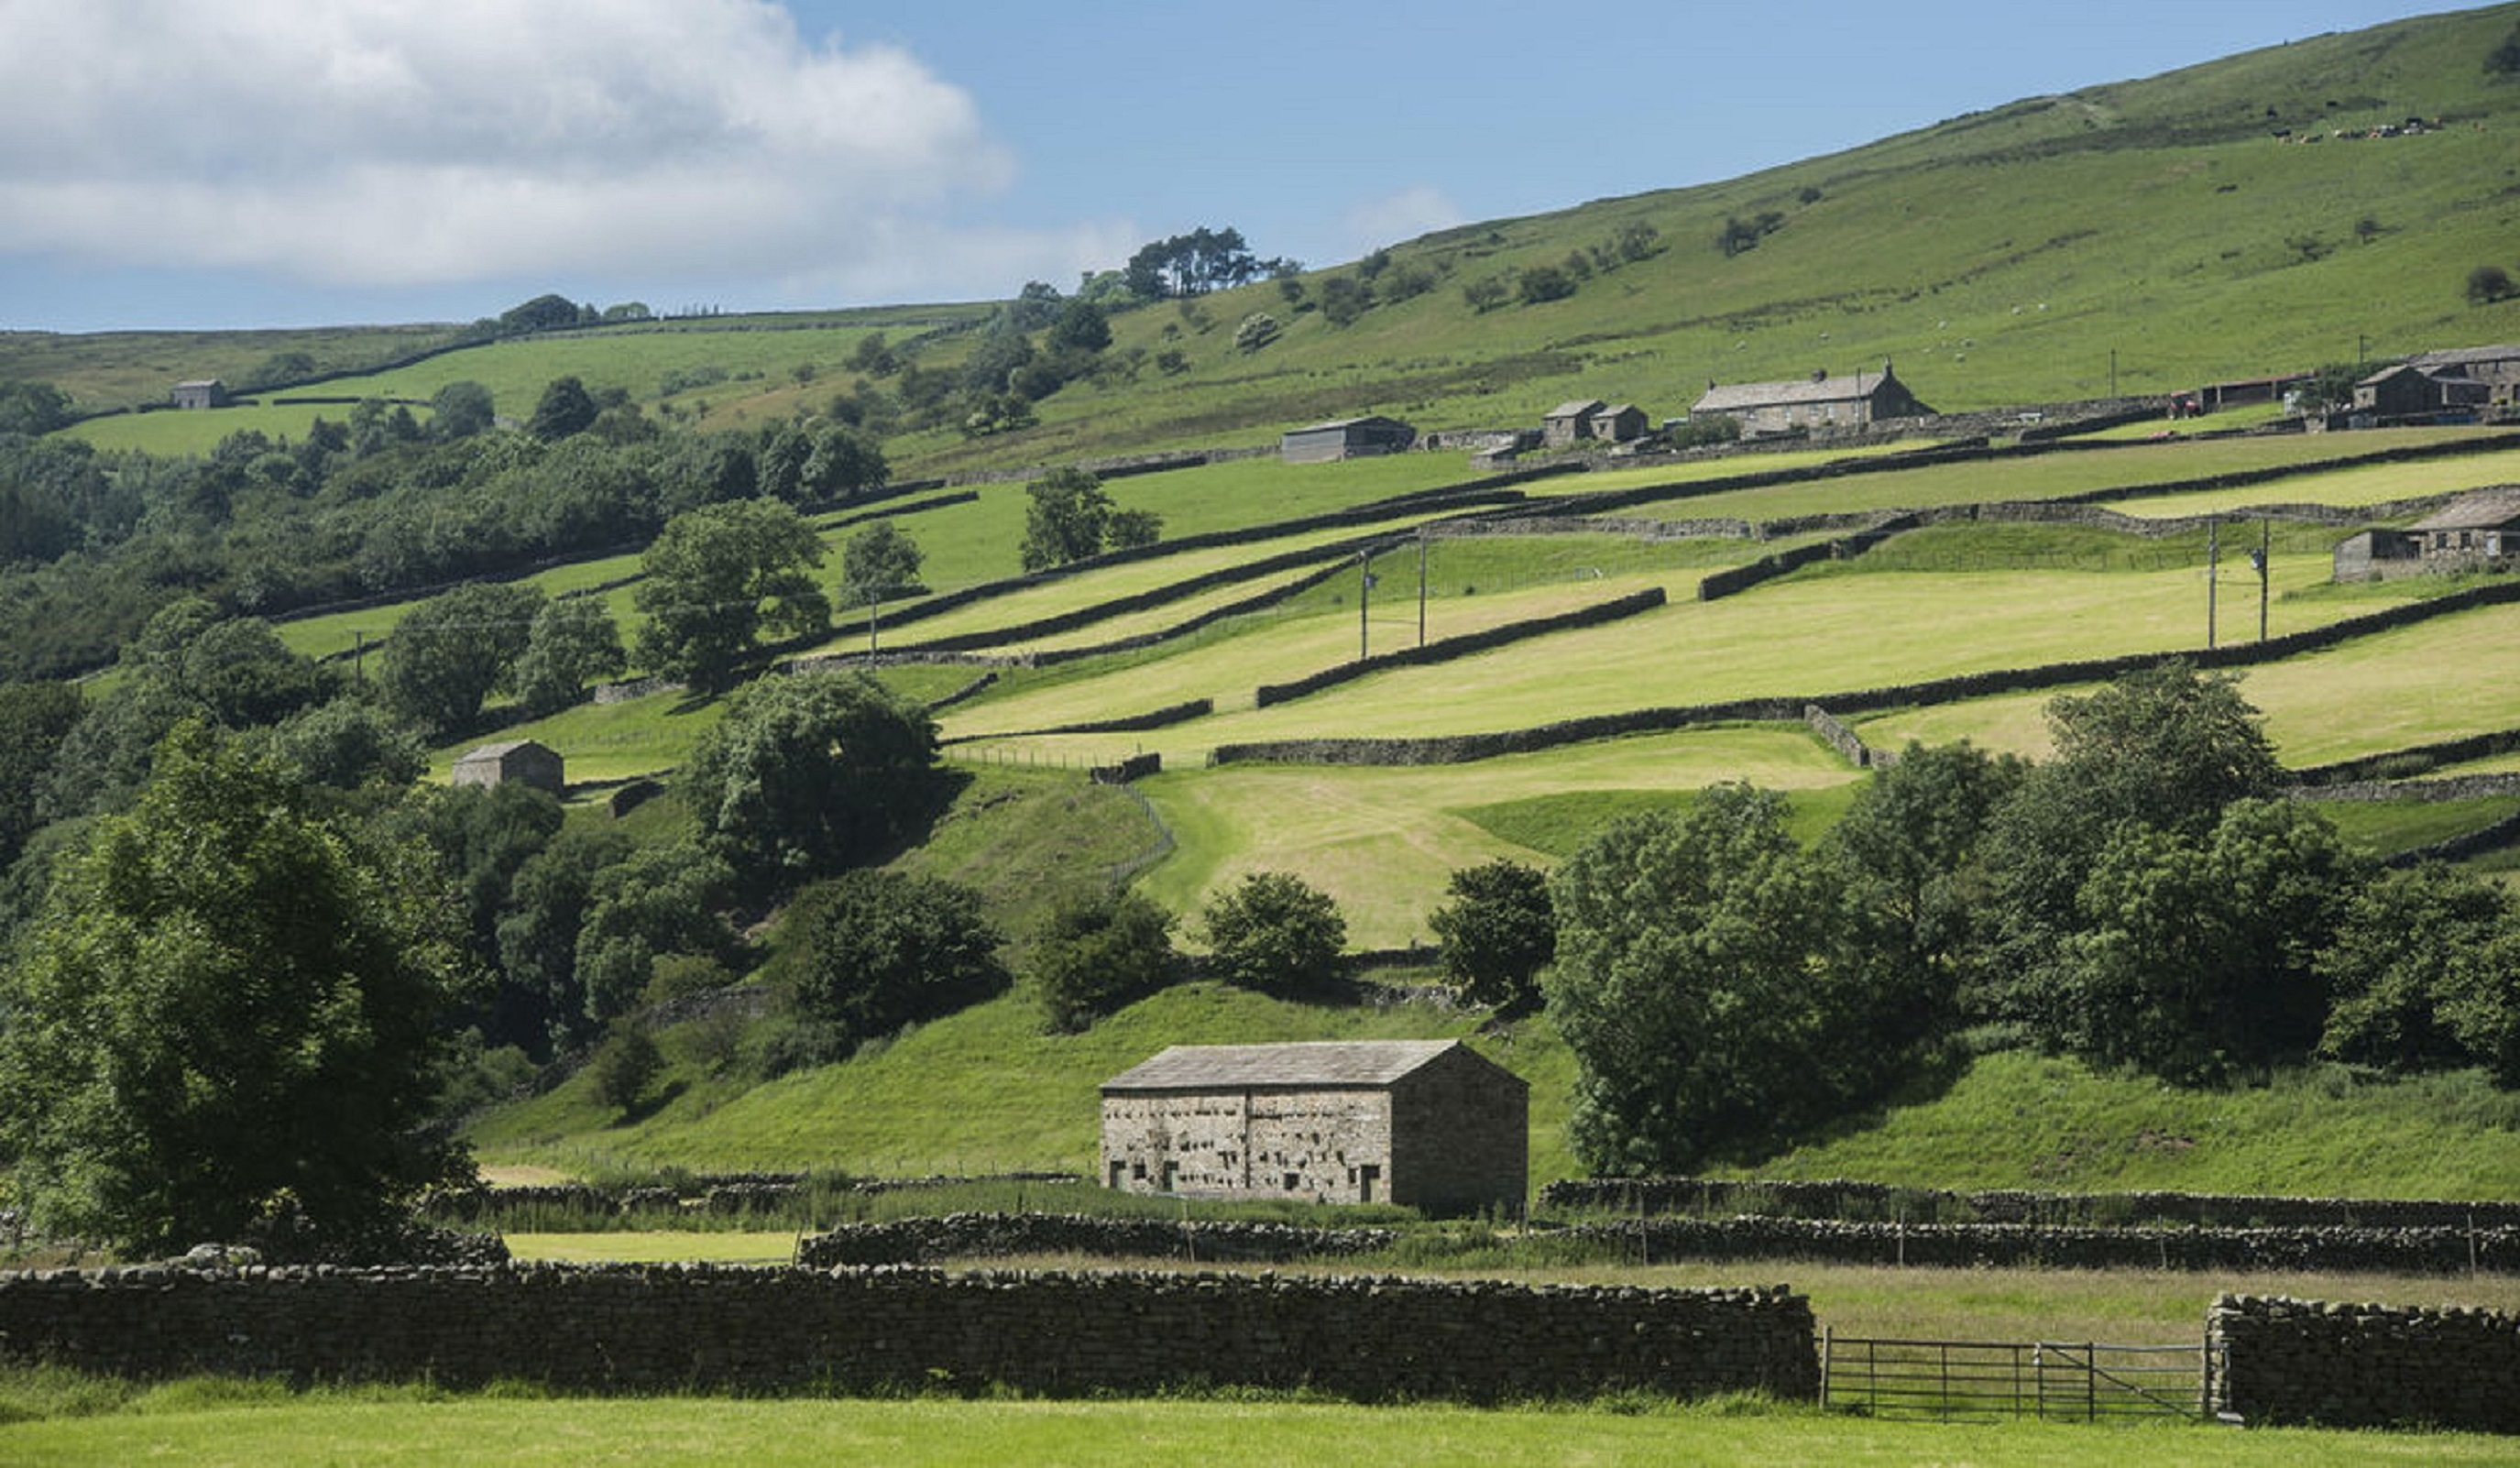 Landscape of the Yorkshire Dales